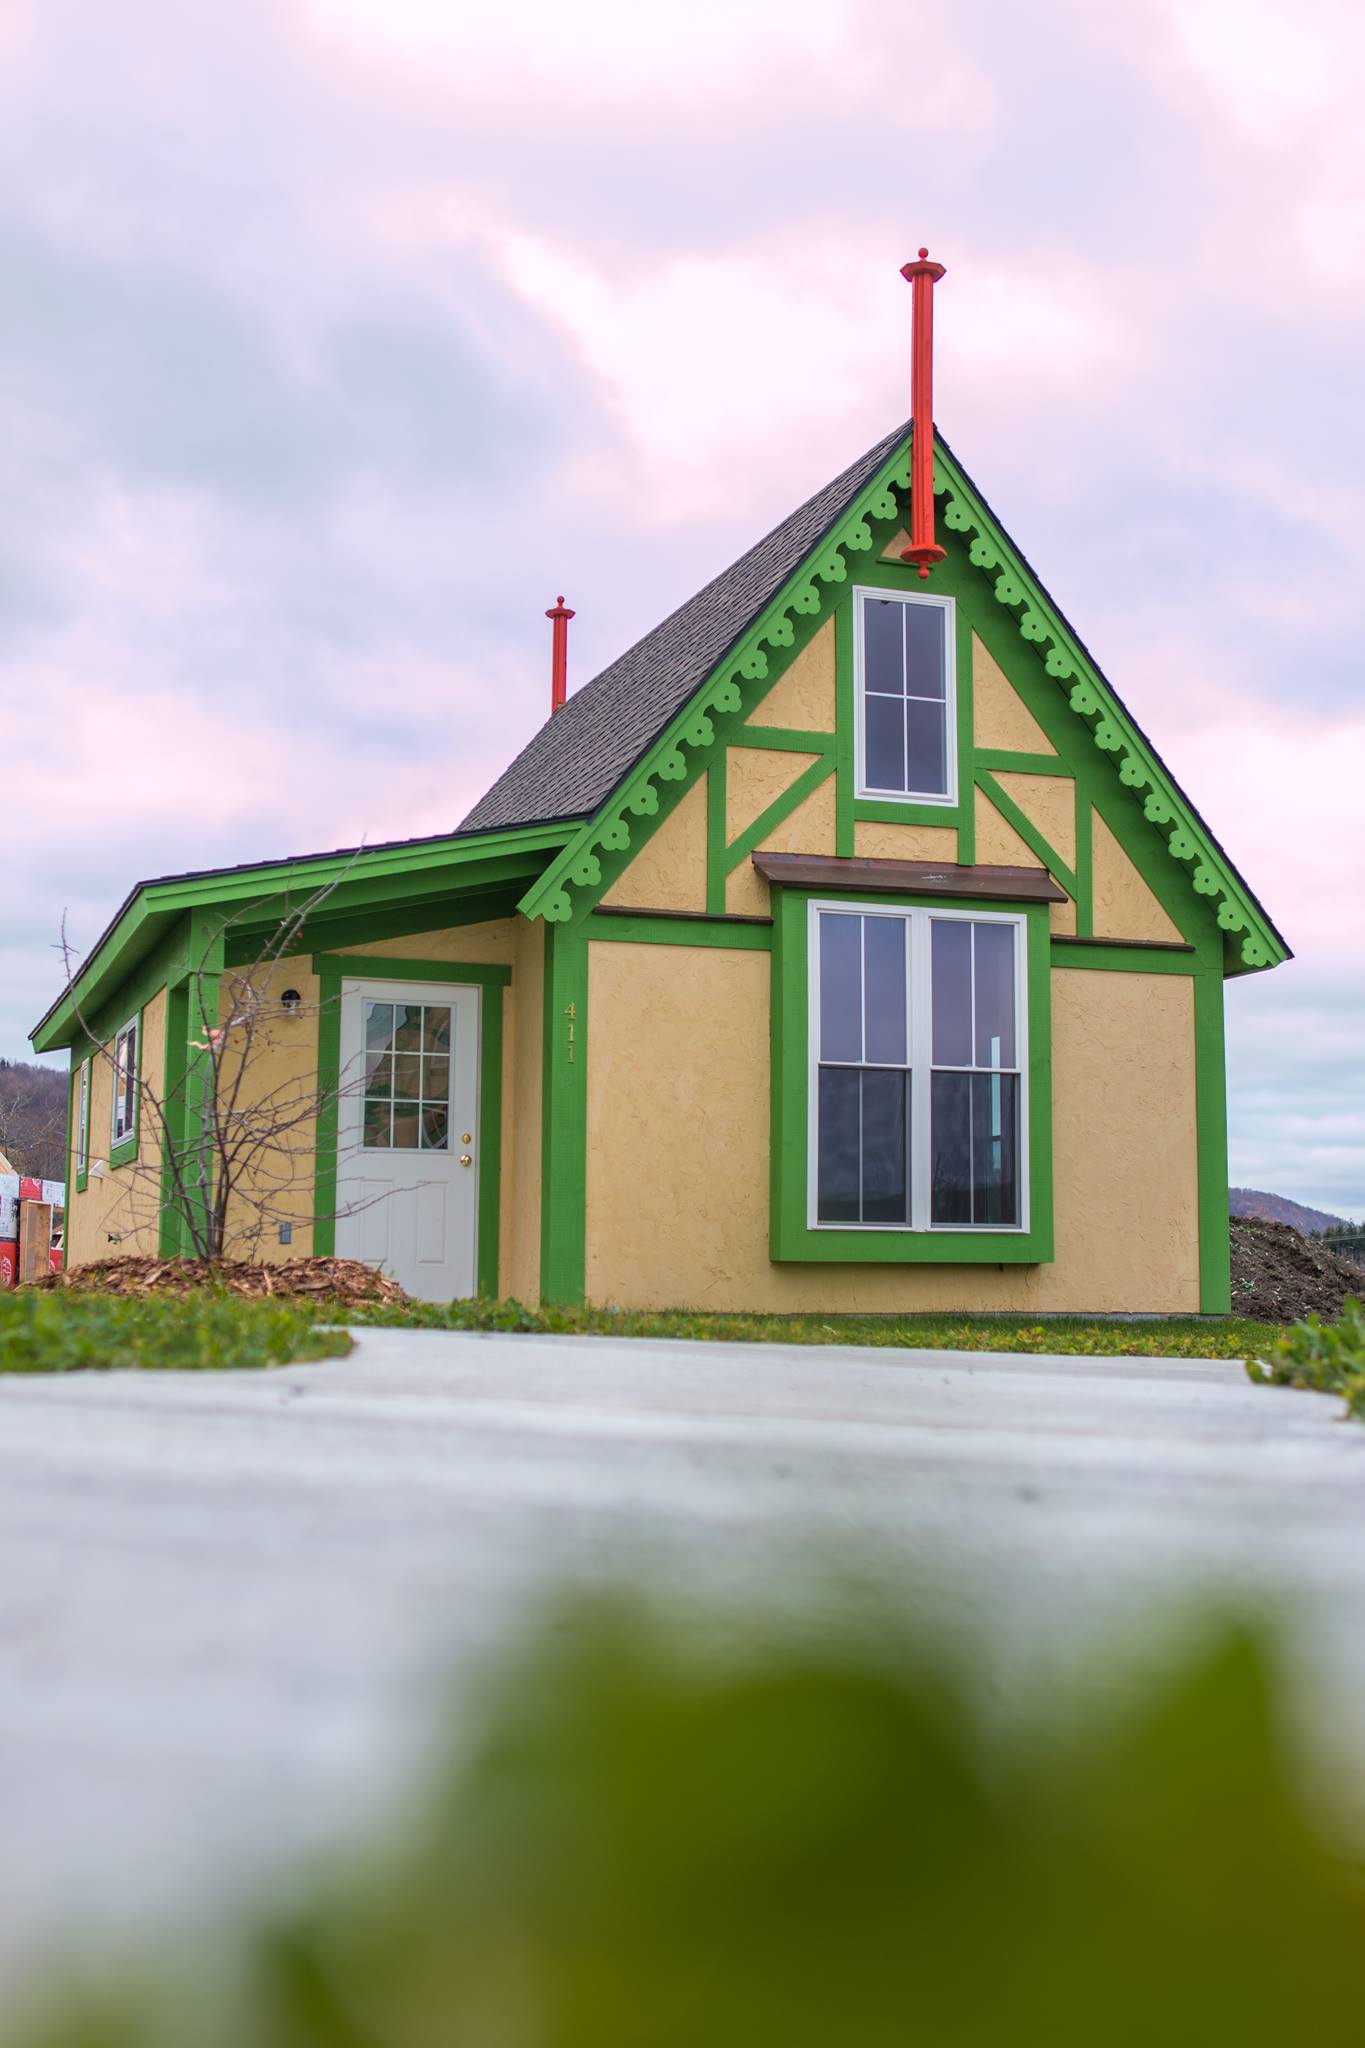 Fausel-Imagery-Green-Tiny-House.jpg